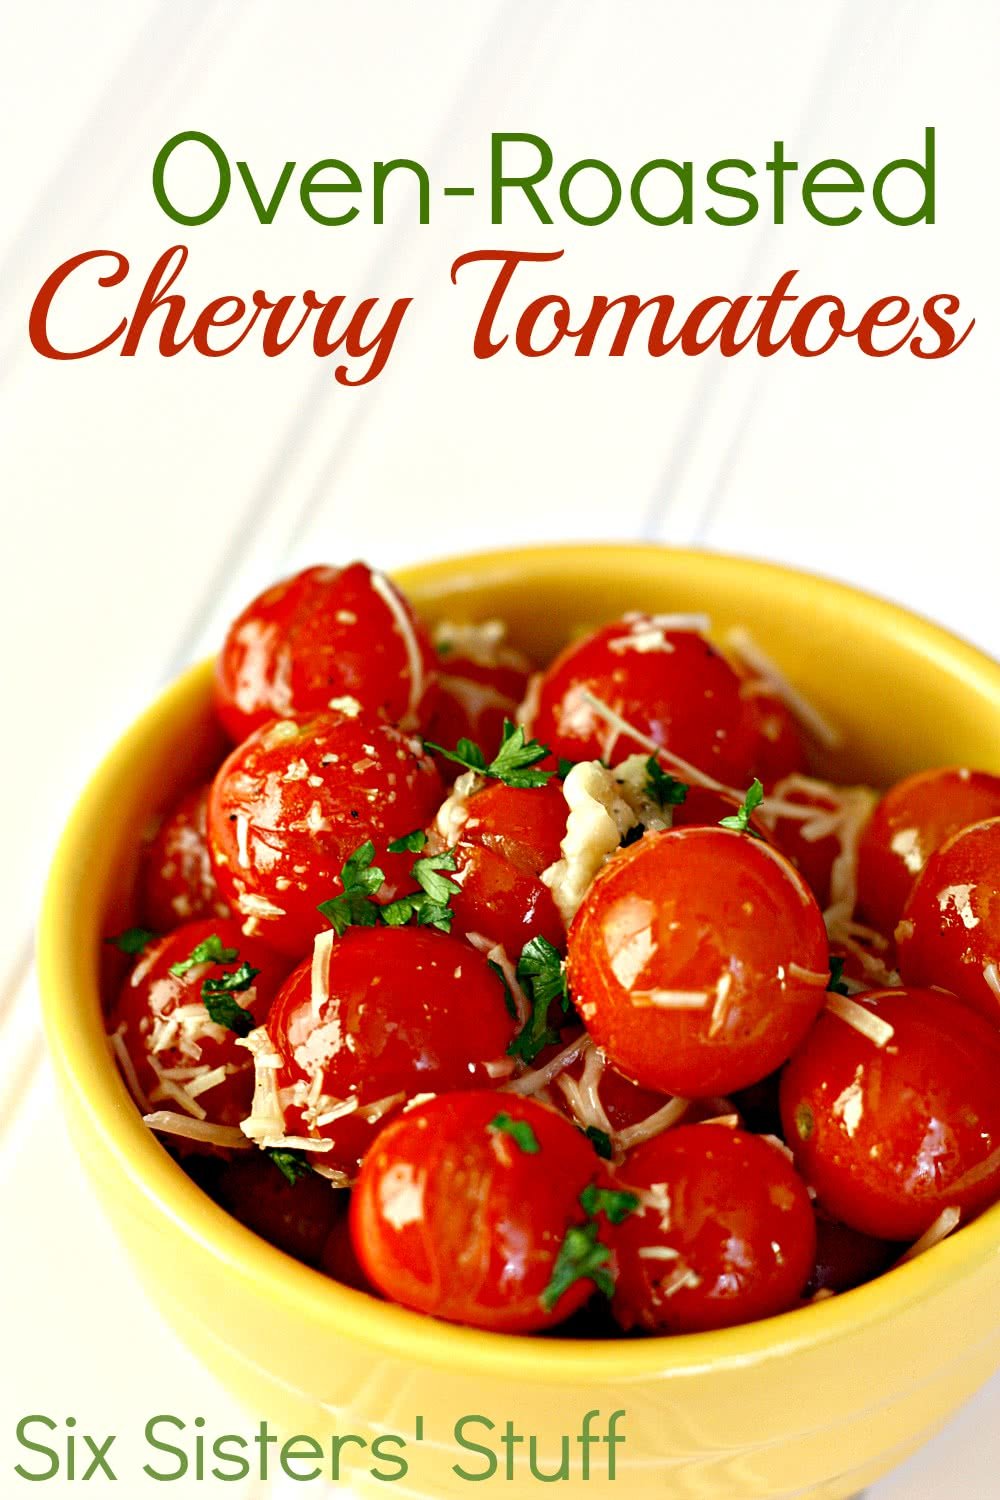 Oven-Roasted Parmesan and Garlic Cherry Tomatoes Recipe